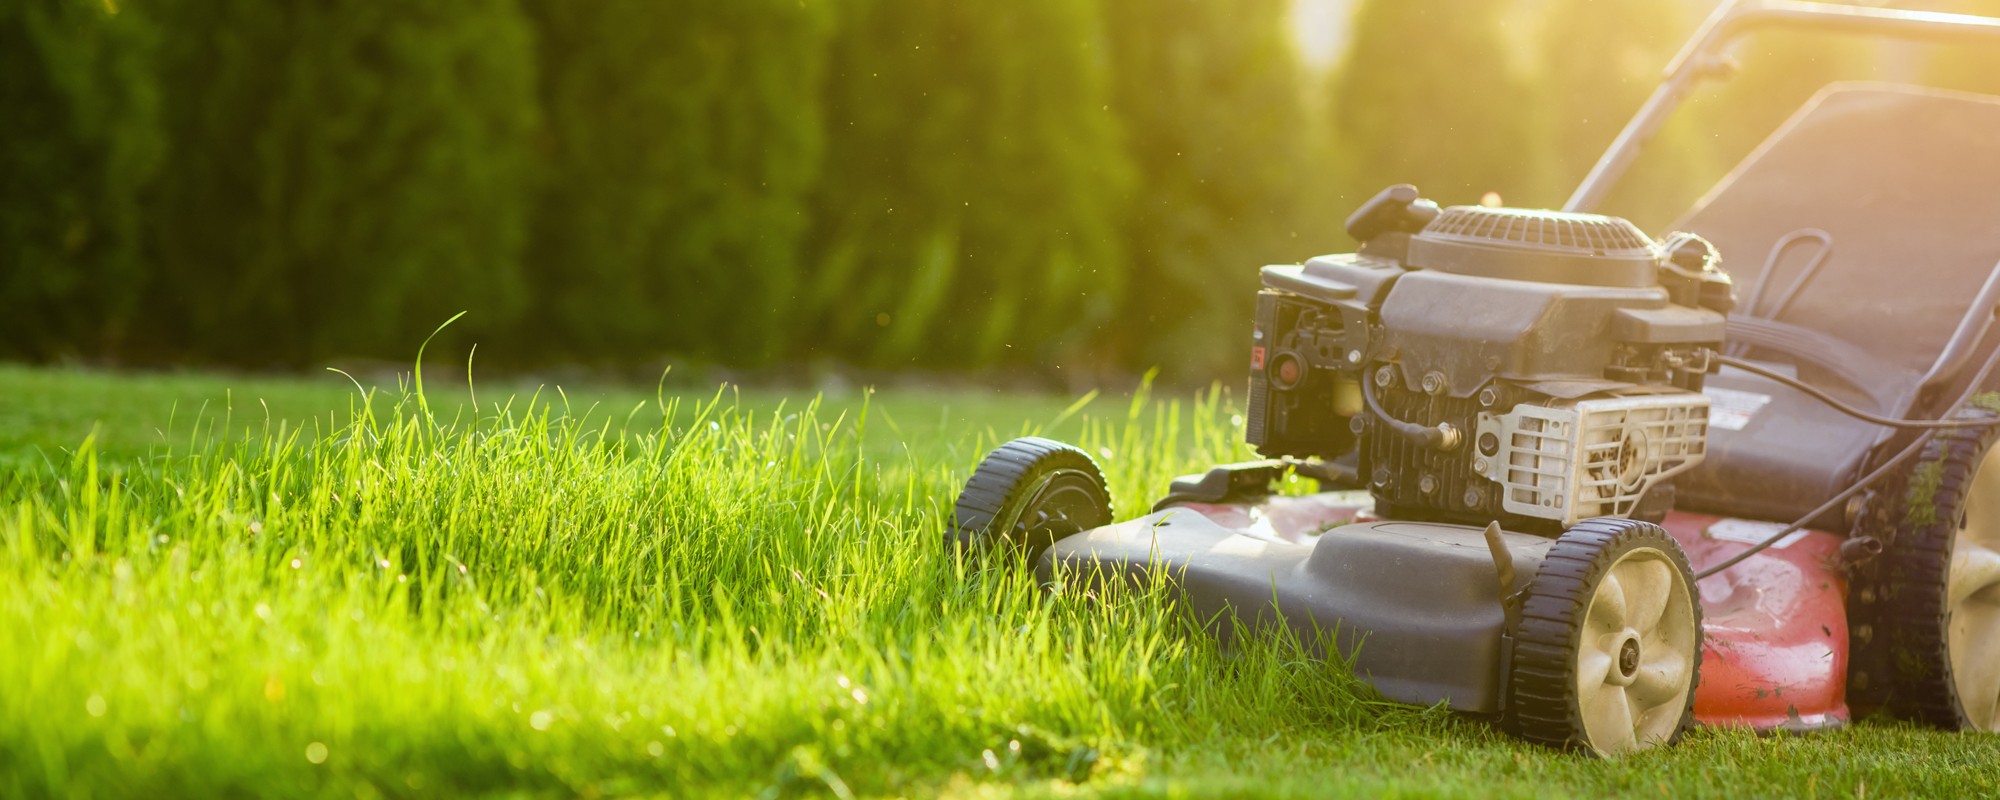 From timers or edgings to lighting or lawn grass, we have your landscape needs covered.